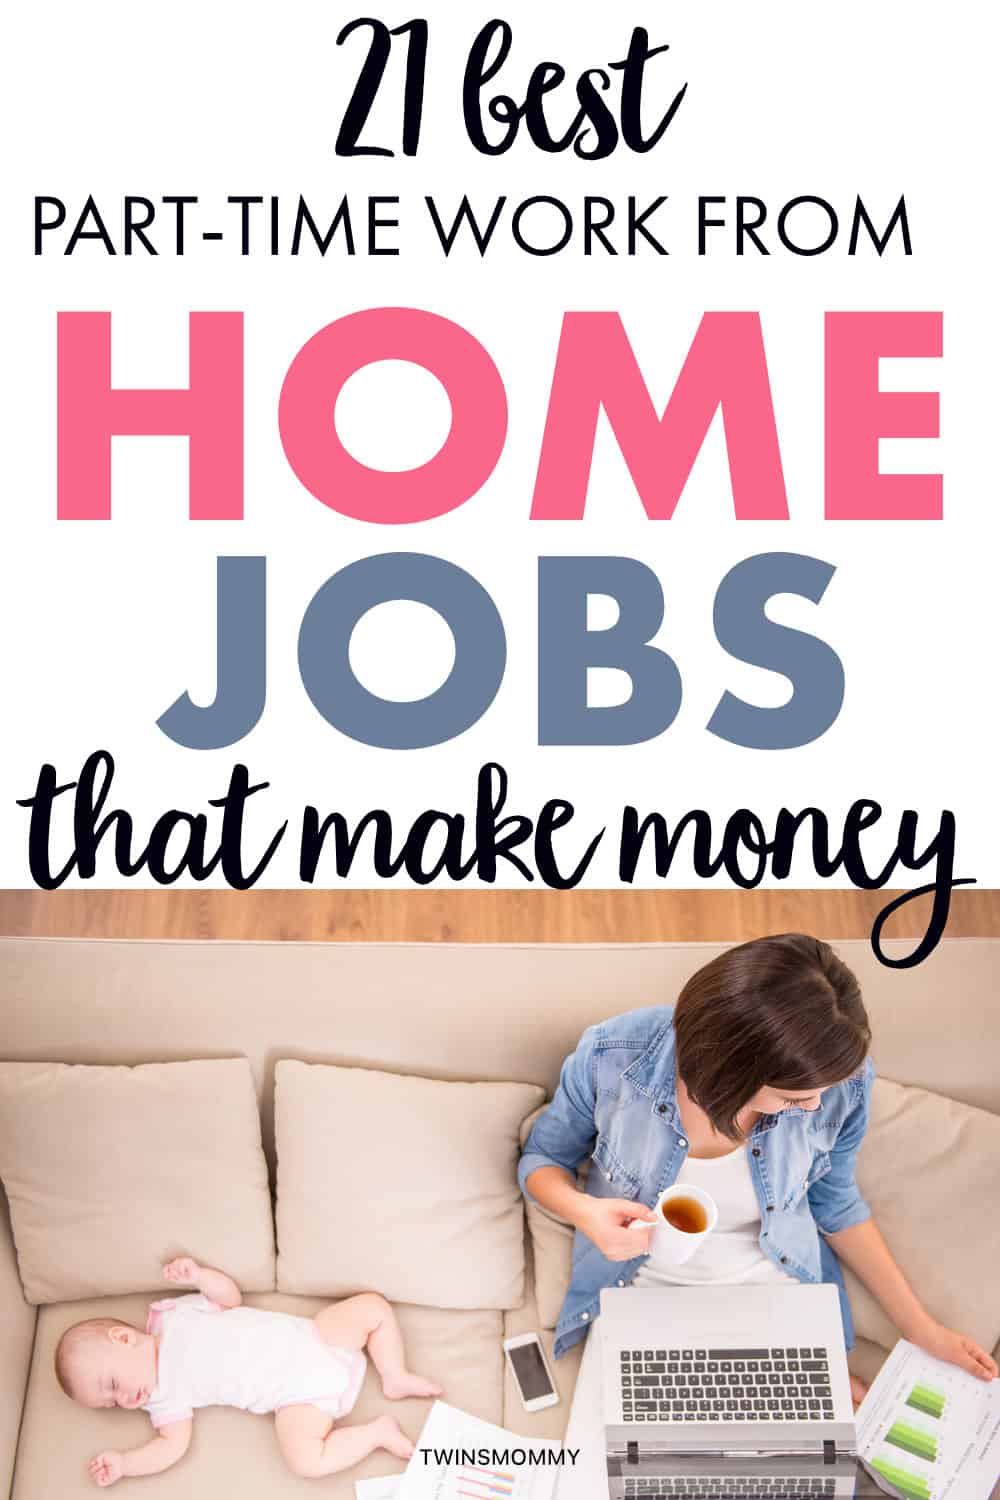 21 Best Part Time Work From Home Jobs That Pay Well Rates and Requirements Twins Mommy